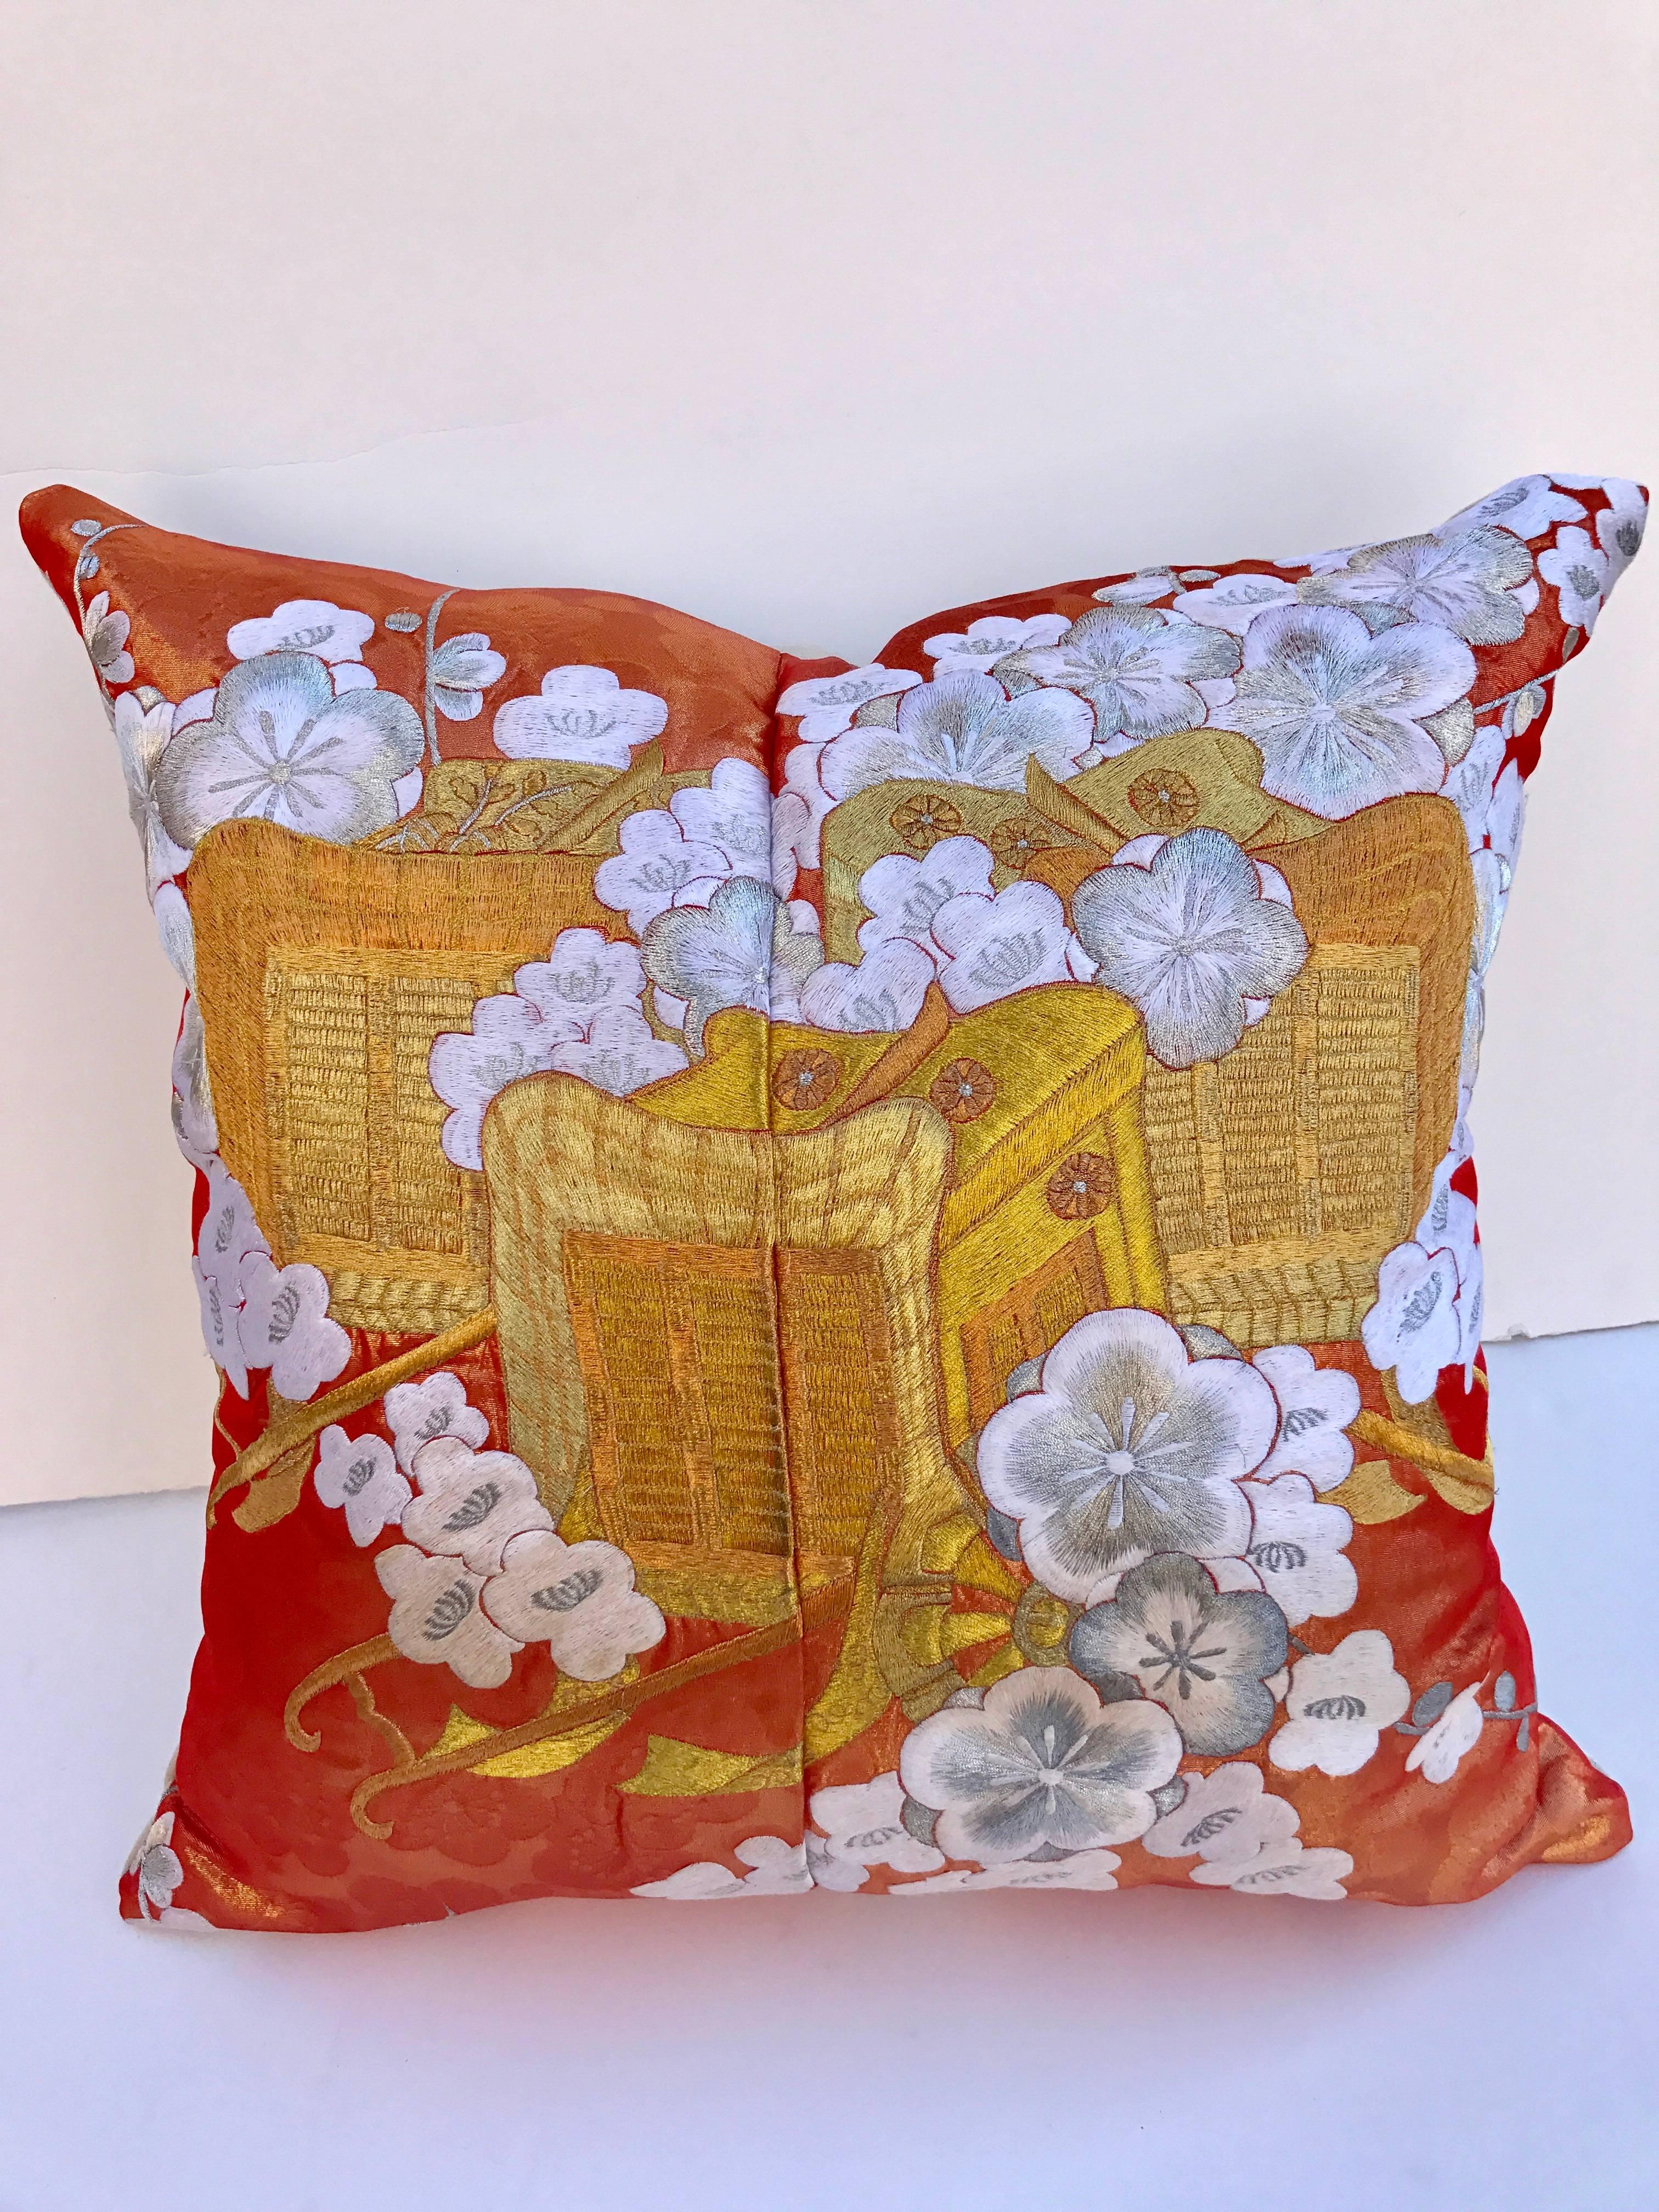 Custom pillow cut from a vintage silk Japanese uchikake, the traditional wedding kimono. The silk textile has a gorgeous design of the royal cart with flowers embroidered with silk and metallic threads. The pillow is backed with a Scalamandre